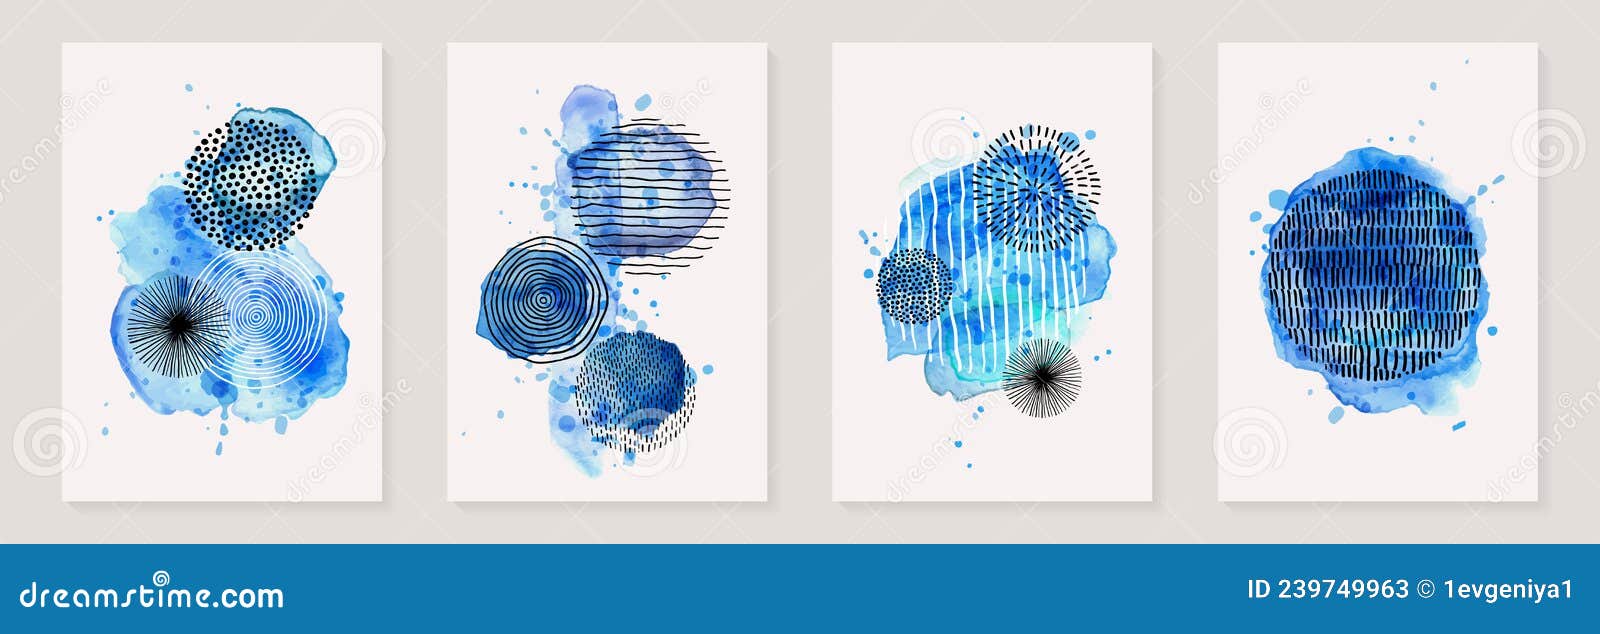 creative minimalist hand painted abstract art background with blue watercolor stain and hand drawn doodle golden color scribble